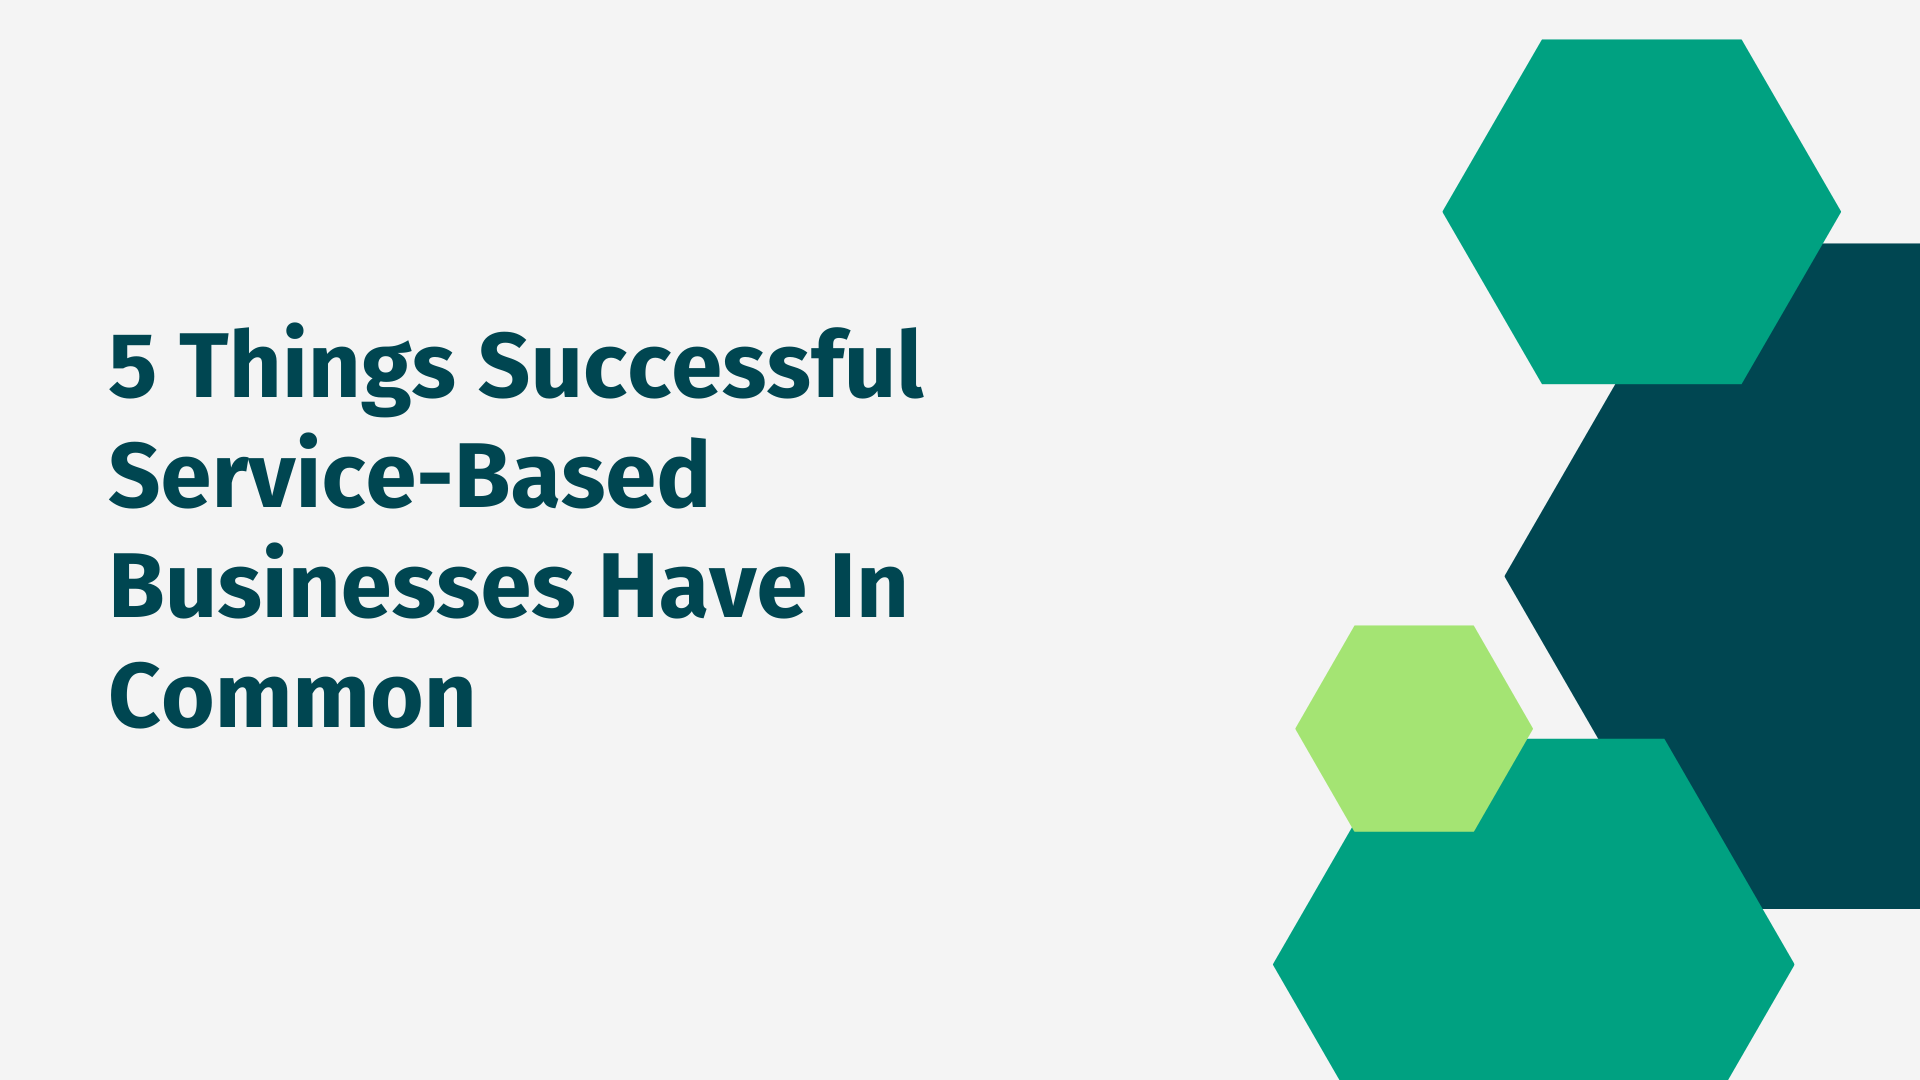 5 Things Successful Service-Based Businesses Have In Common